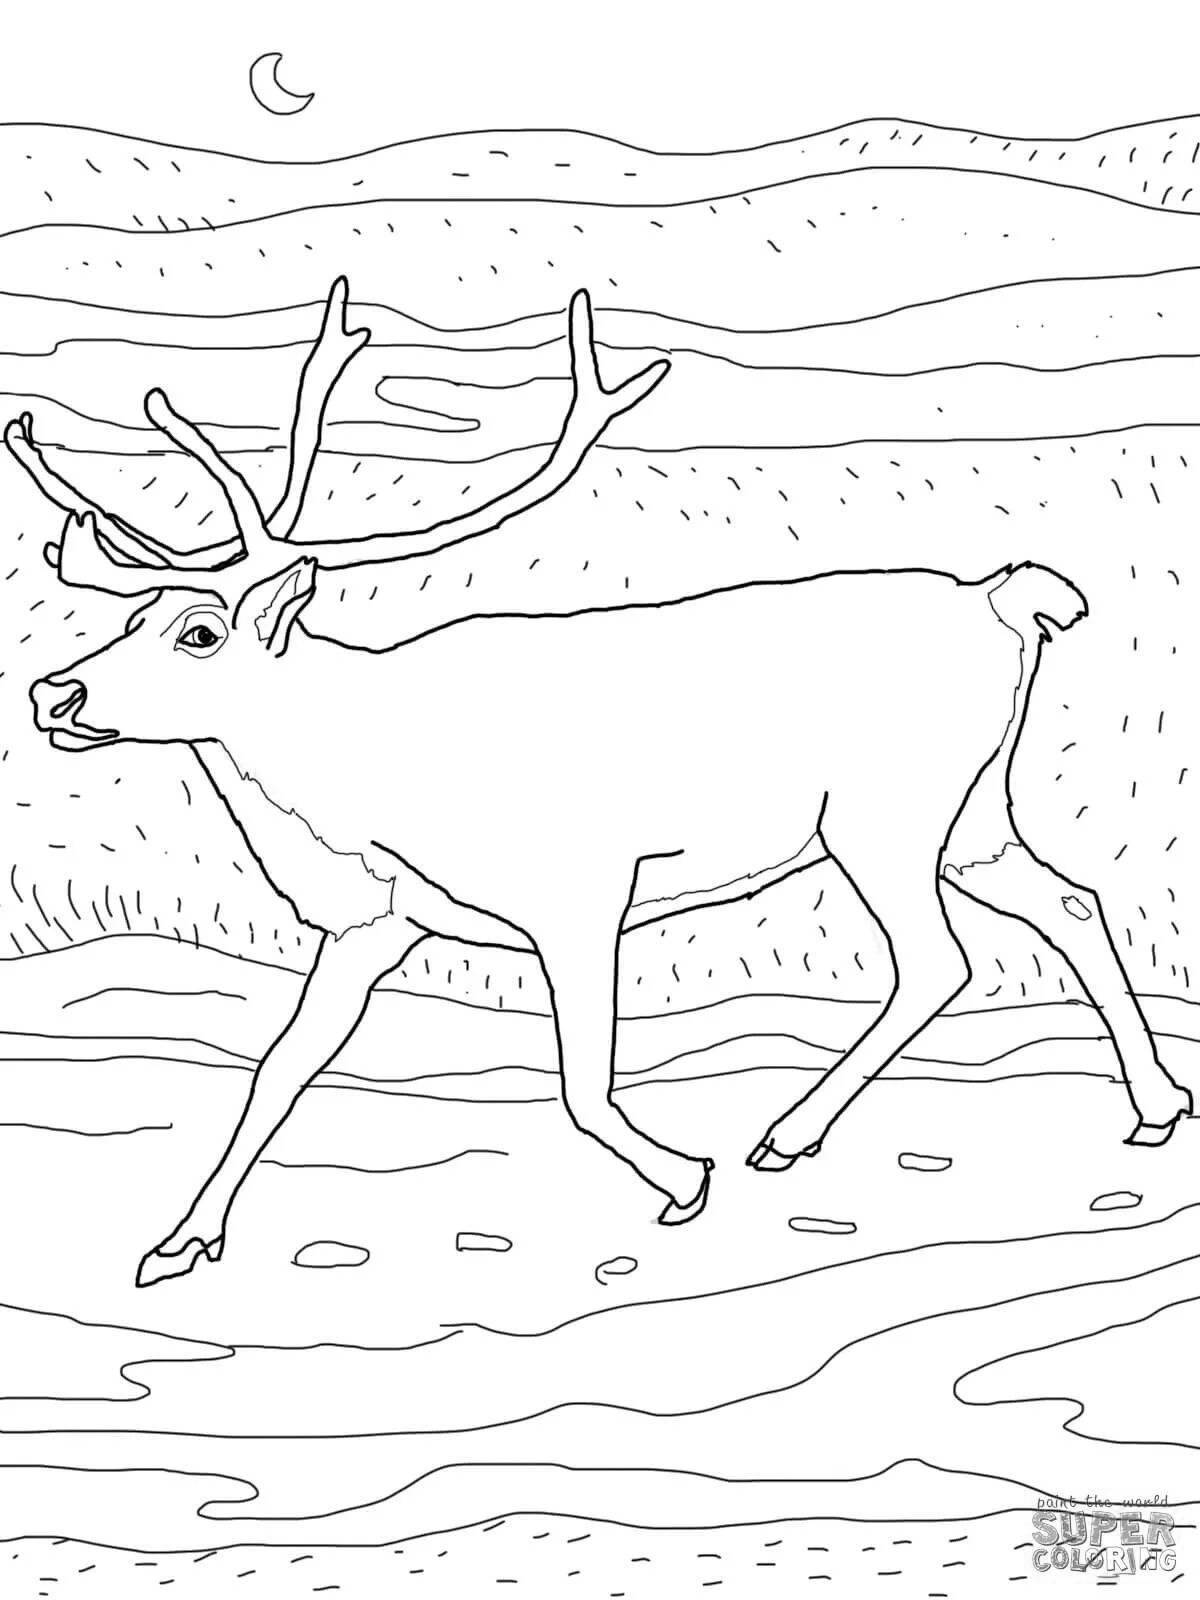 Exciting animals of the far north coloring pages